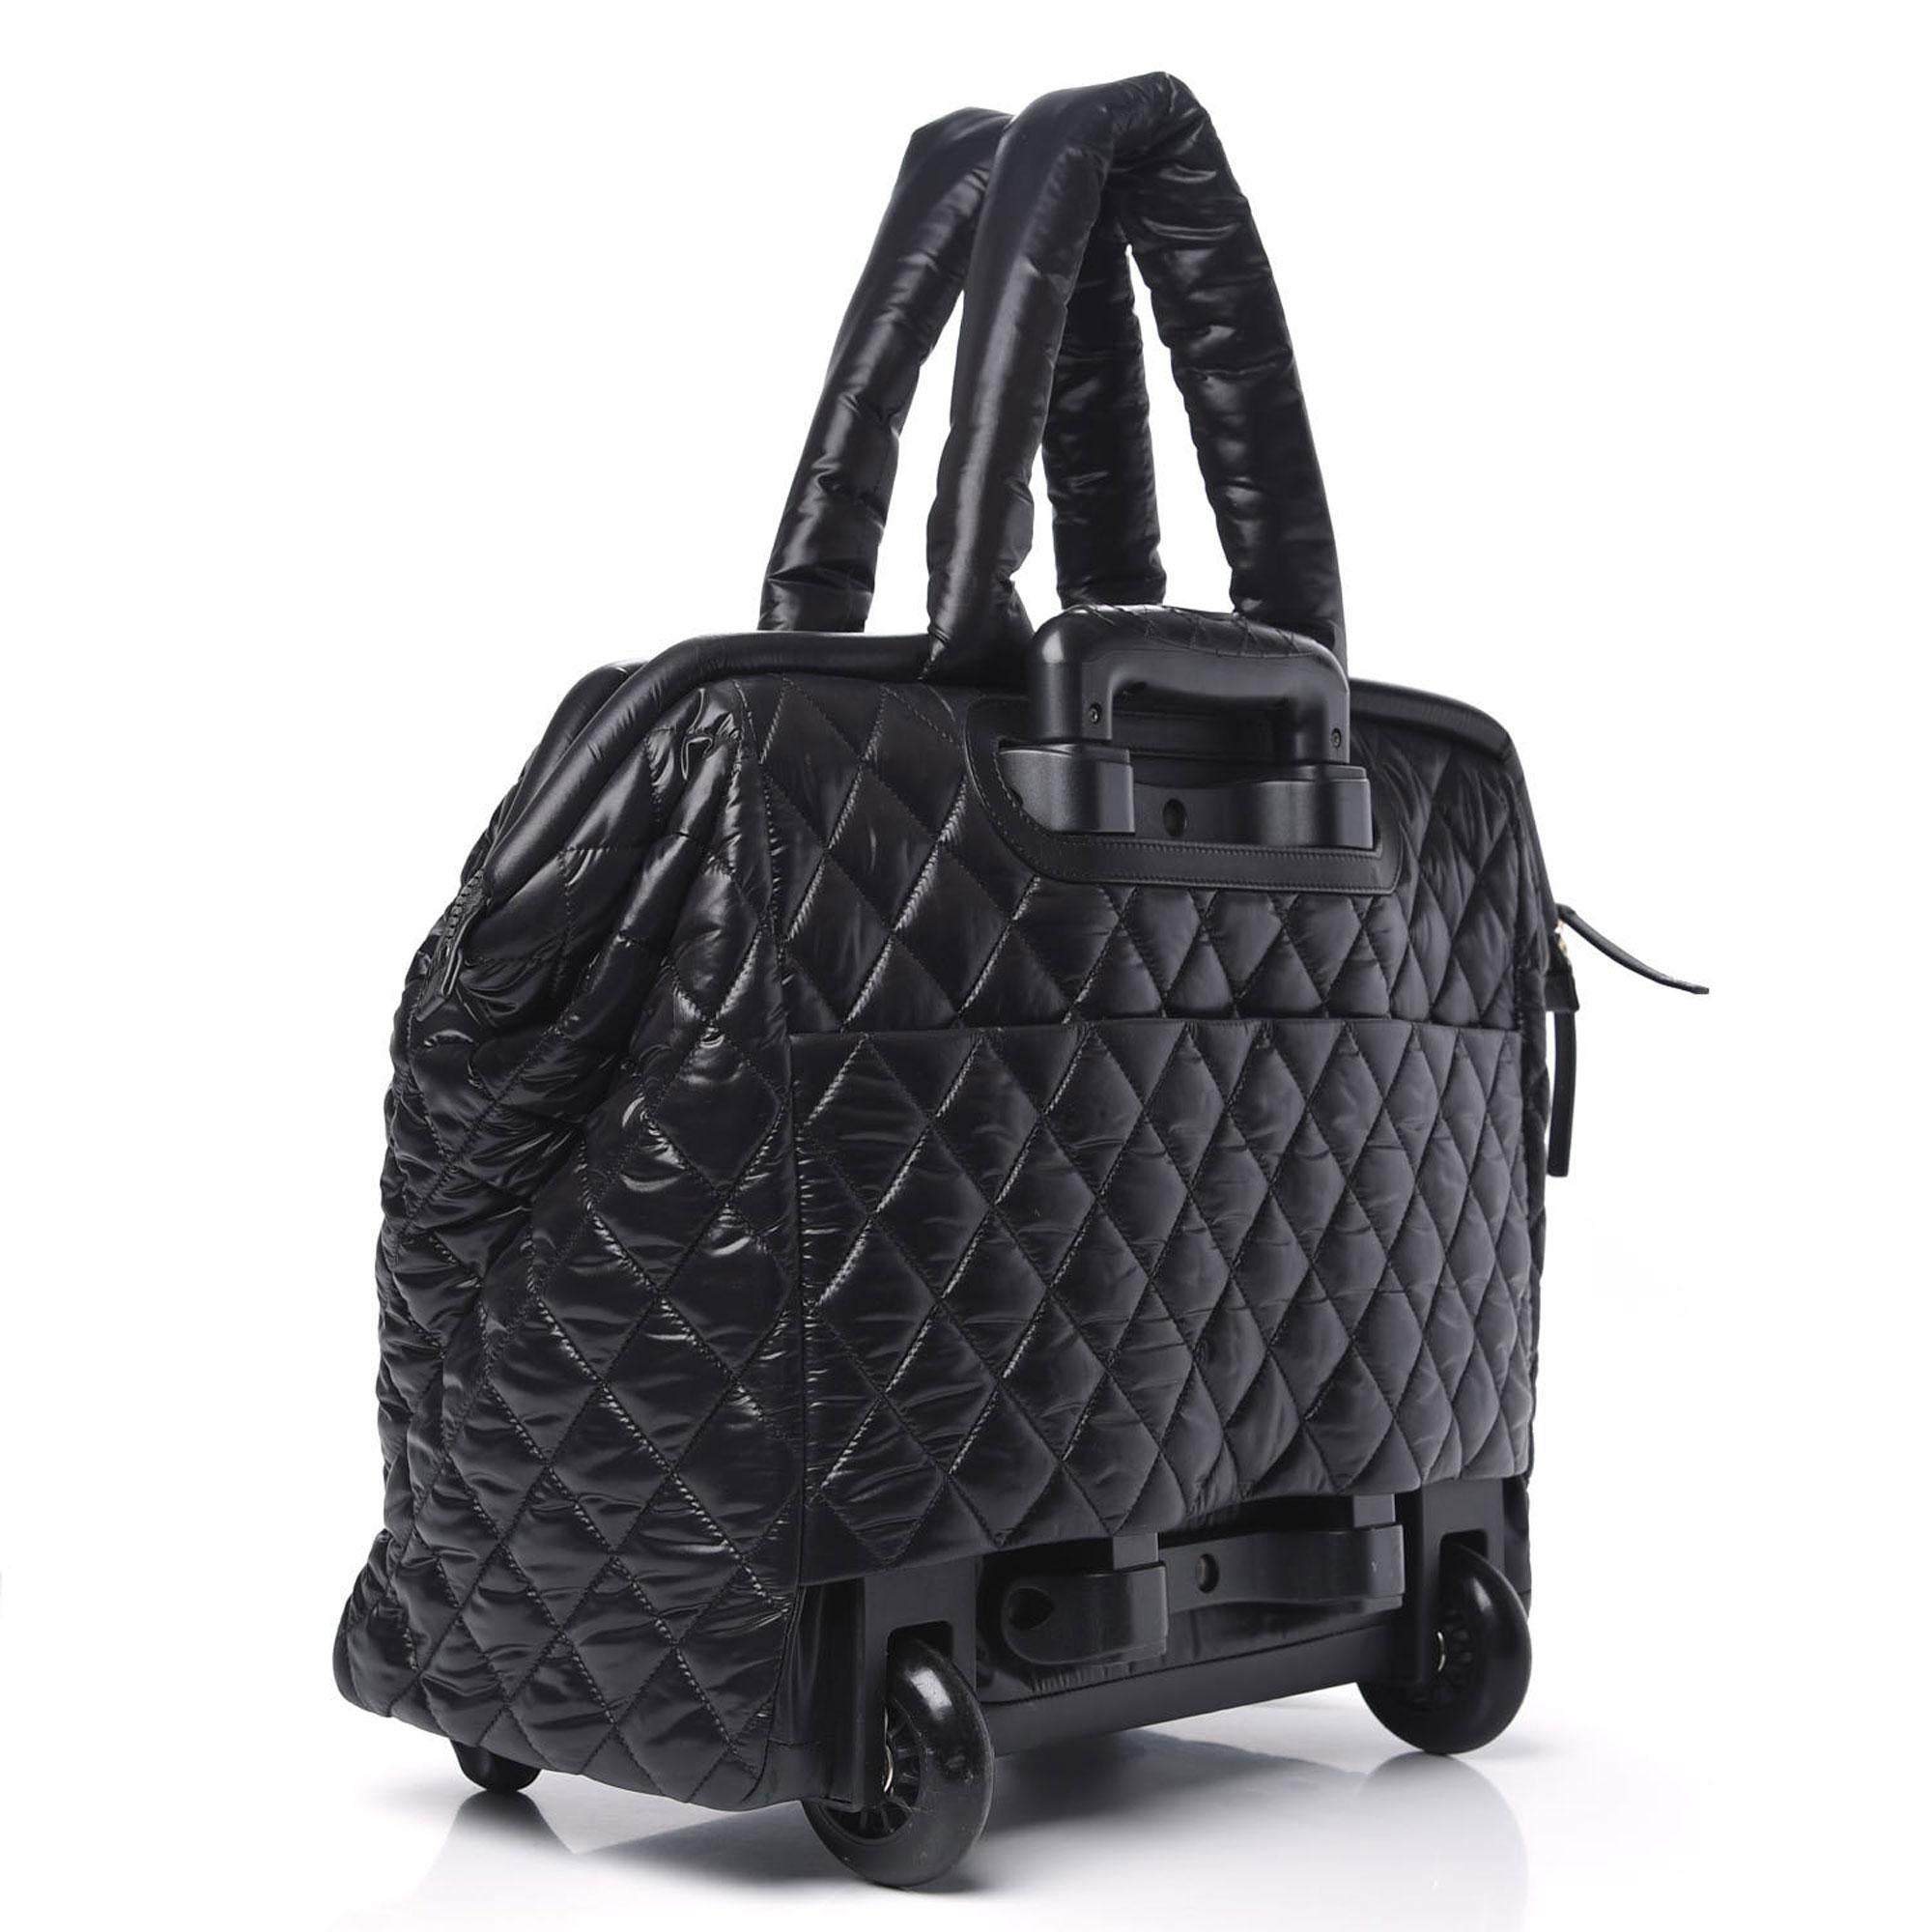 Chanel 2012 Coco Cocoon Quilted Case Carry On Trolley Travel Black Luggage Bag For Sale 6